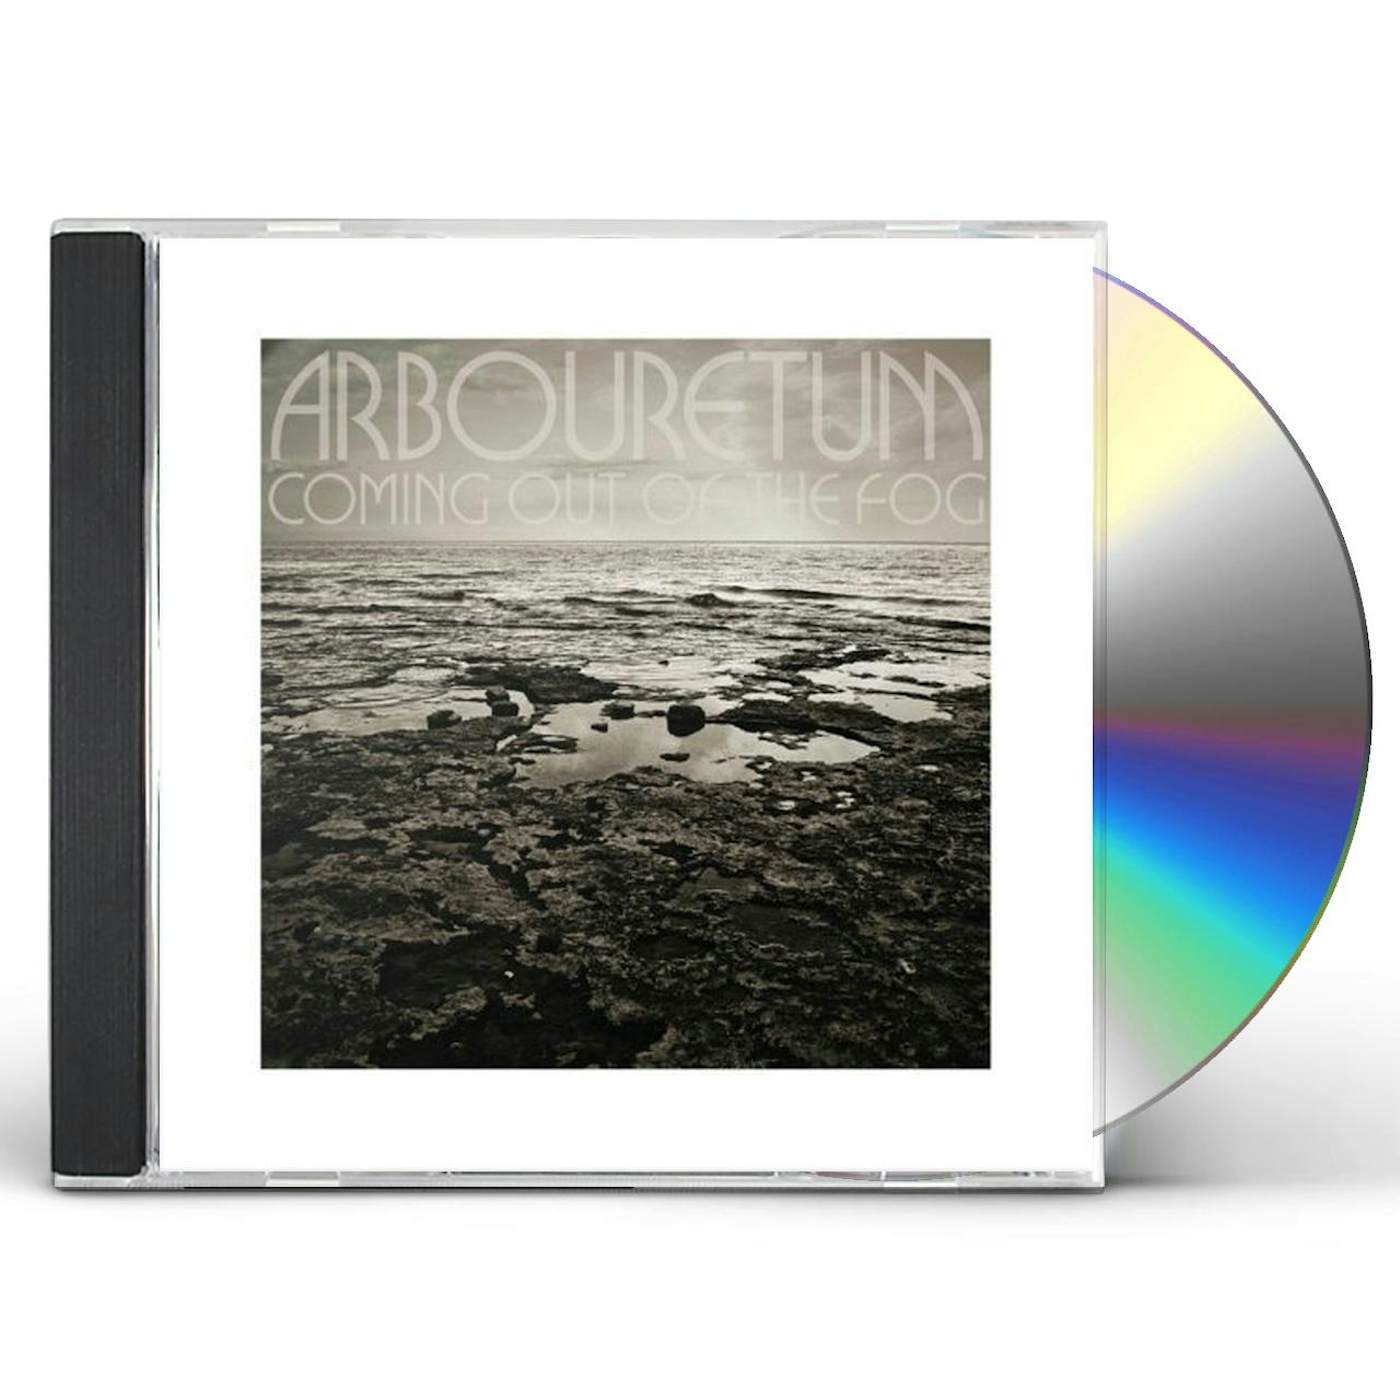 Arbouretum COMING OUT OF THE FOG CD